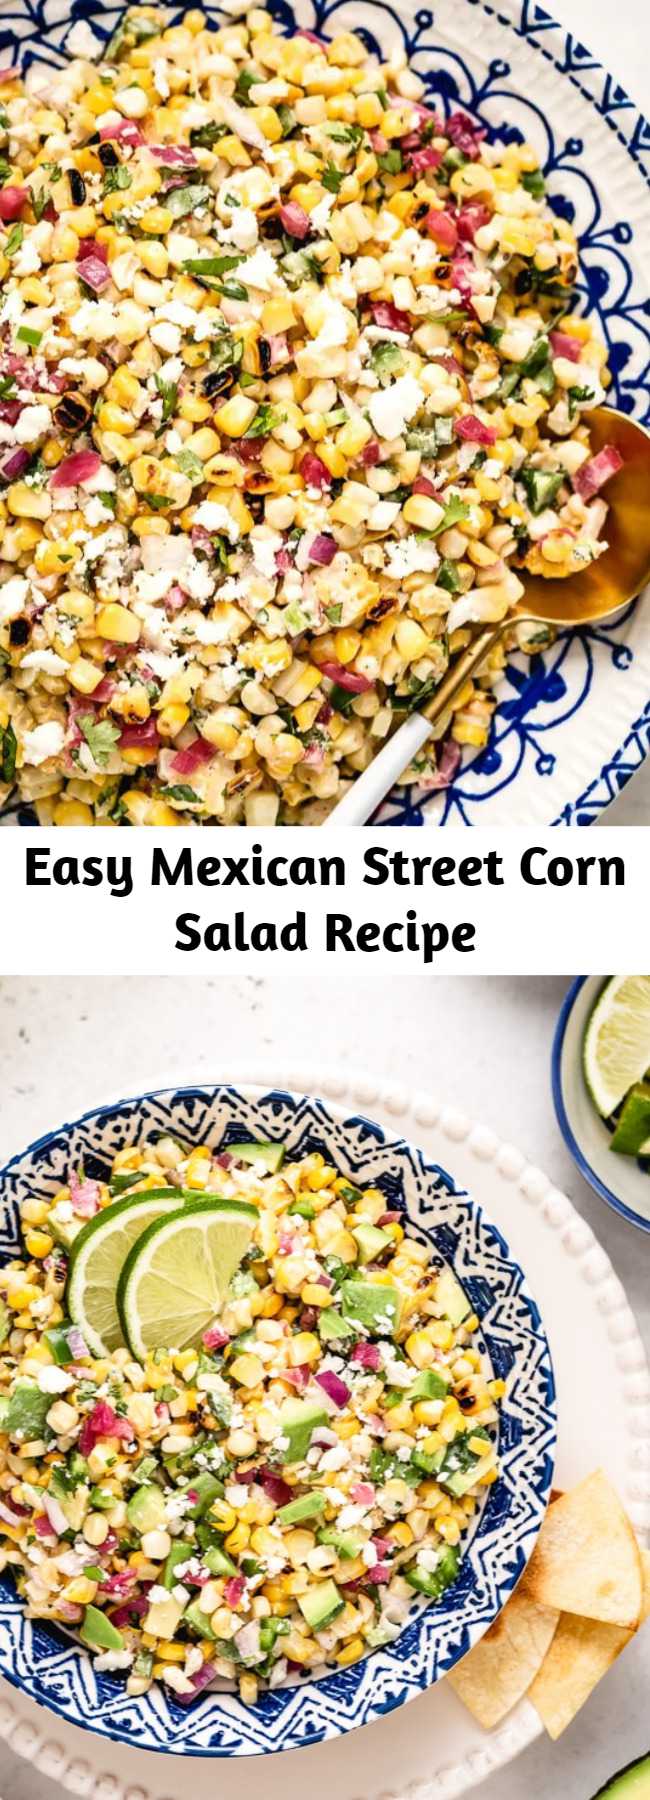 Easy Mexican Street Corn Salad Recipe - This Mexican Street Corn Salad recipe (aka Esquites or Elote salad) is tangy, spicy, and deliciously creamy. Whether you cook the corn on the grill or in a skillet, this easy Mexican corn salad is guaranteed to be a hit for all your summer gatherings. #corn #salad #cornsalad #mexicancorn #mexicansalad #sweetcornsalad